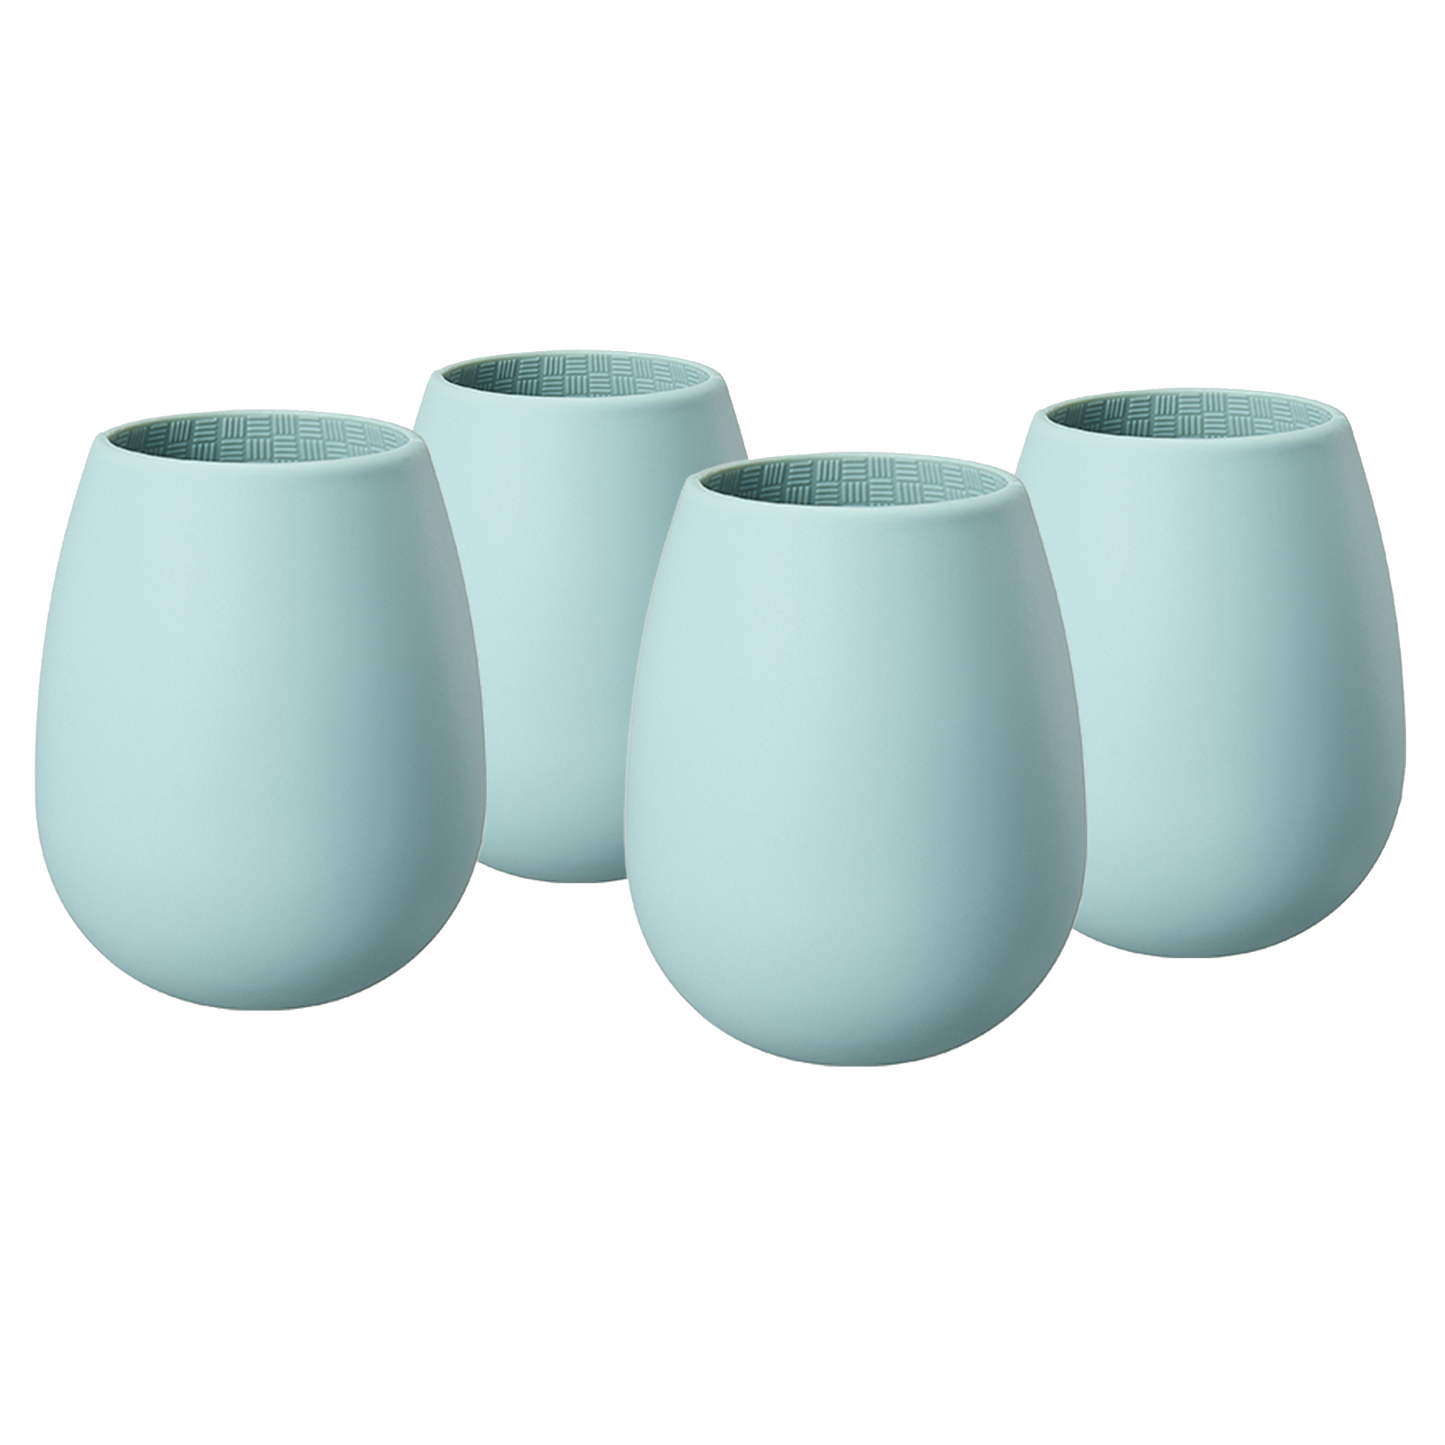 Mint Blue Unbreakable Silicone Wine Glasses | Set of 4